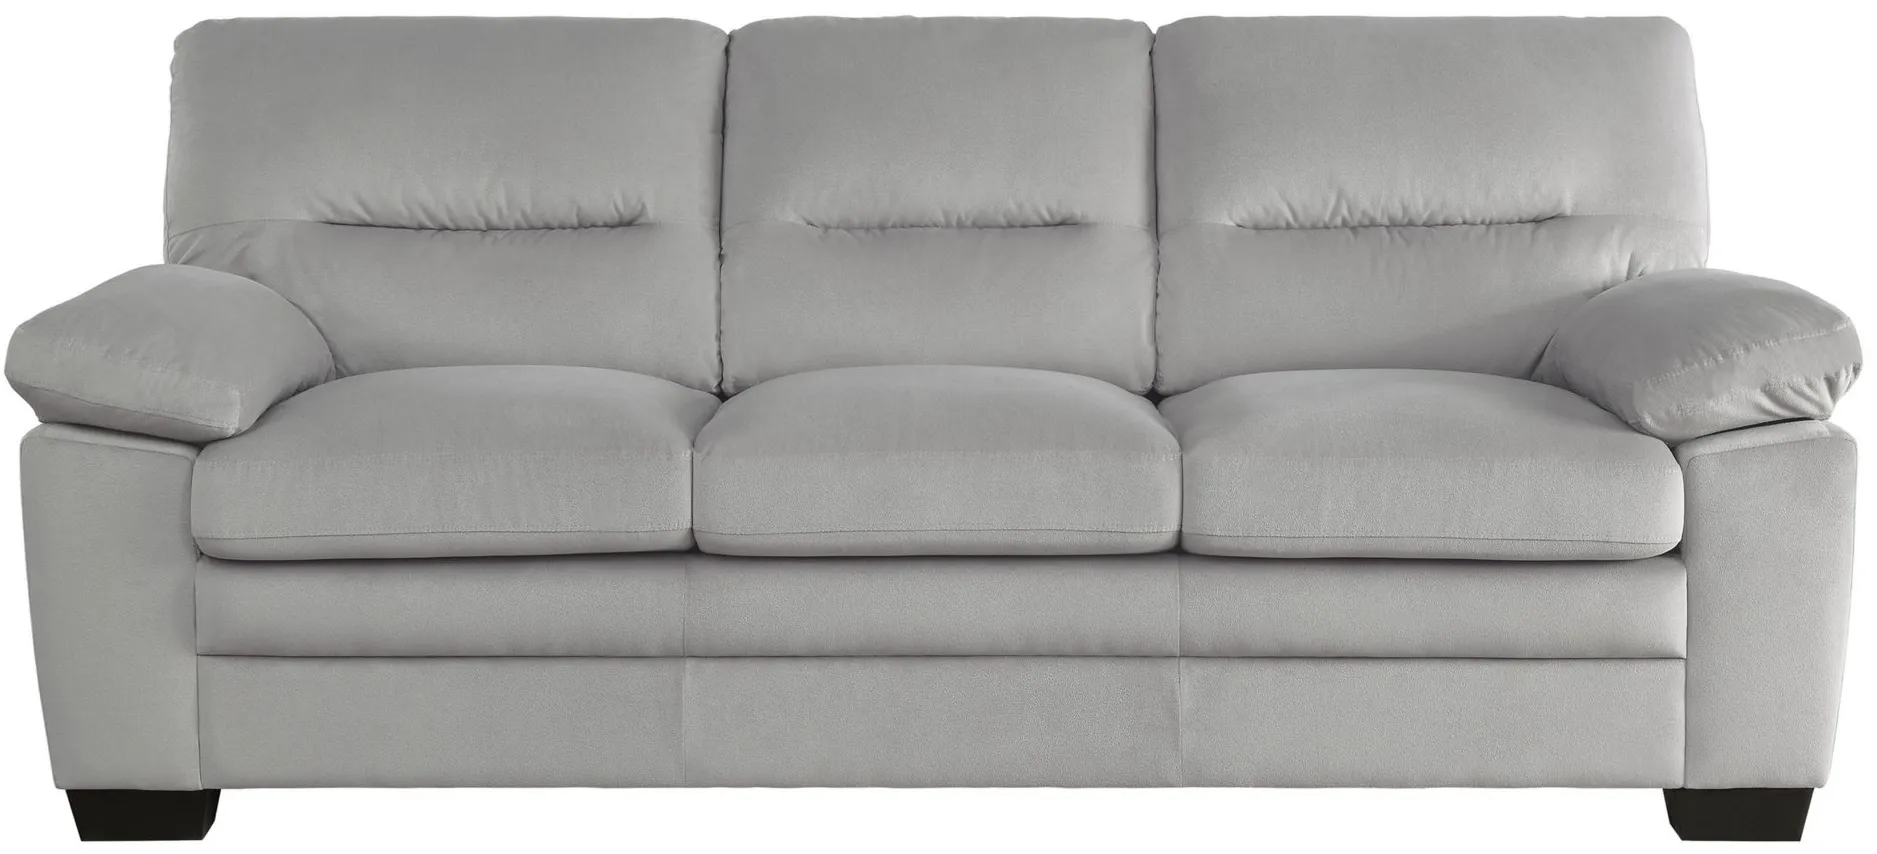 Violette Sofa in Gray by Homelegance